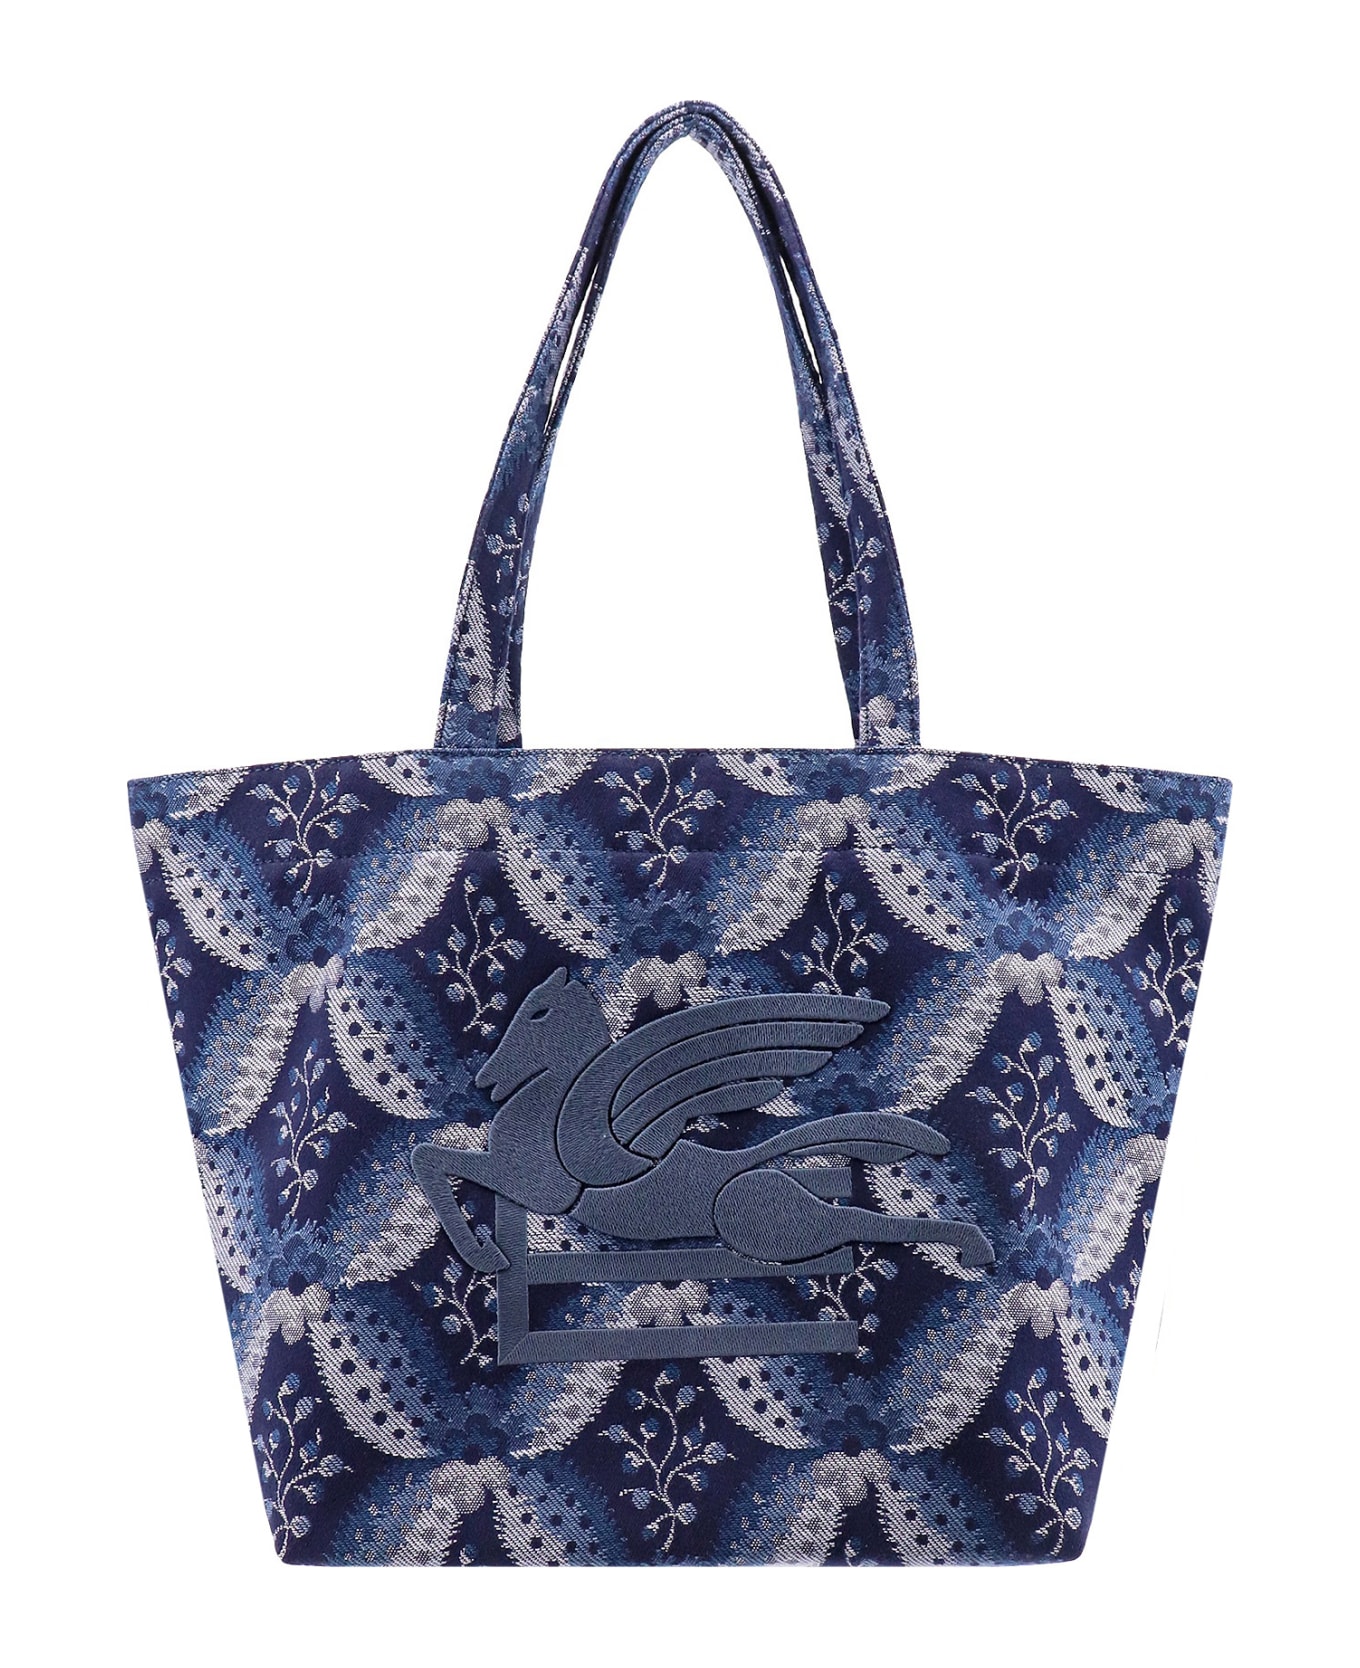 Etro Embroidered Canvas Medium Soft Trotter Shopping Bag - Blue ショルダーバッグ